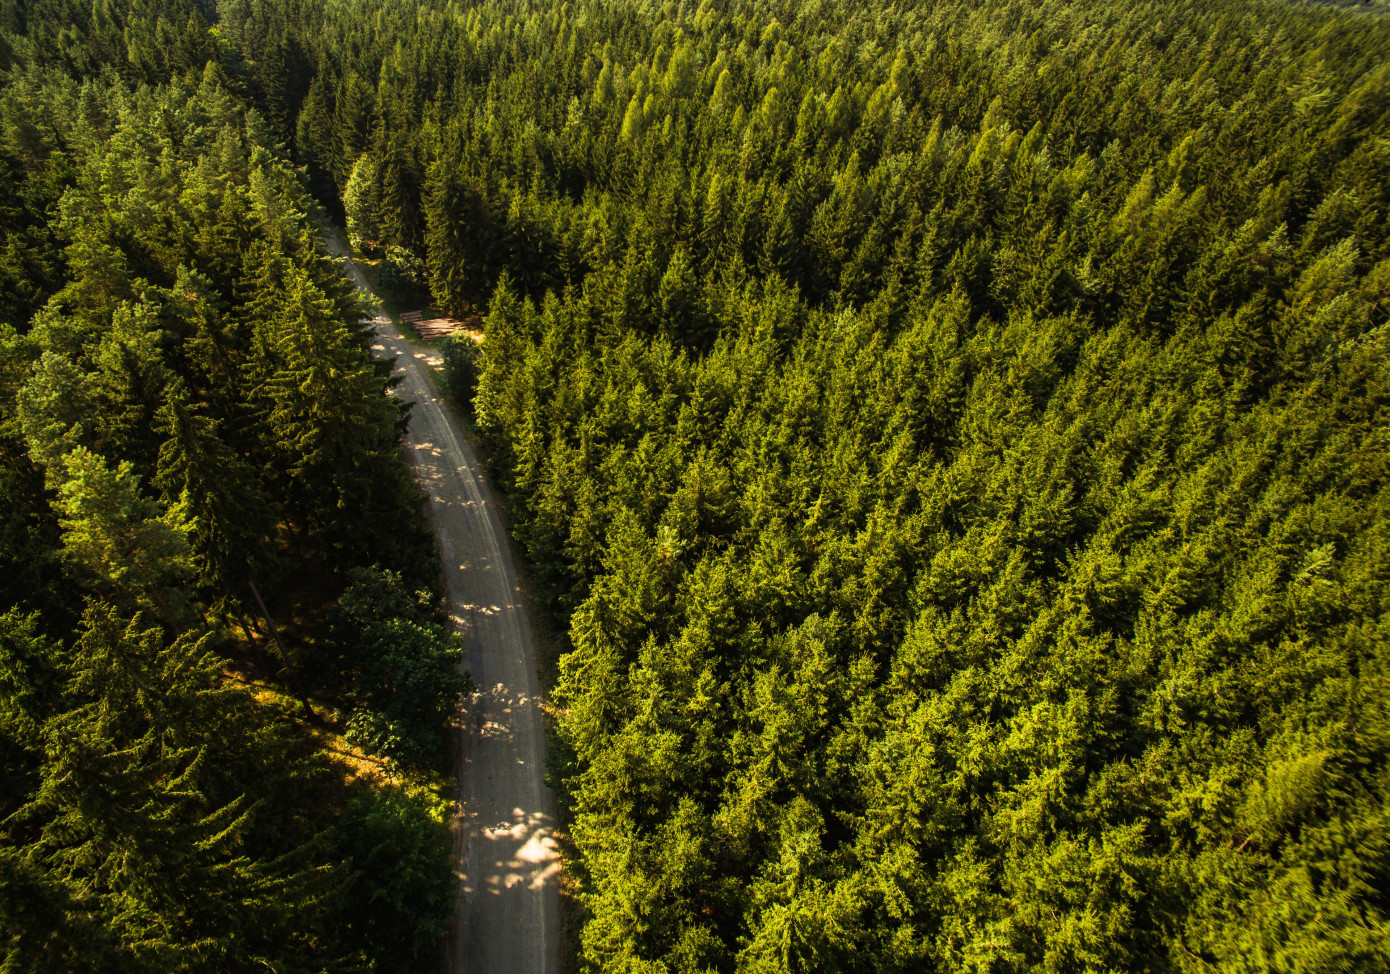 Average area of Swedish forest owners increased to 34 hectares in last 24 years